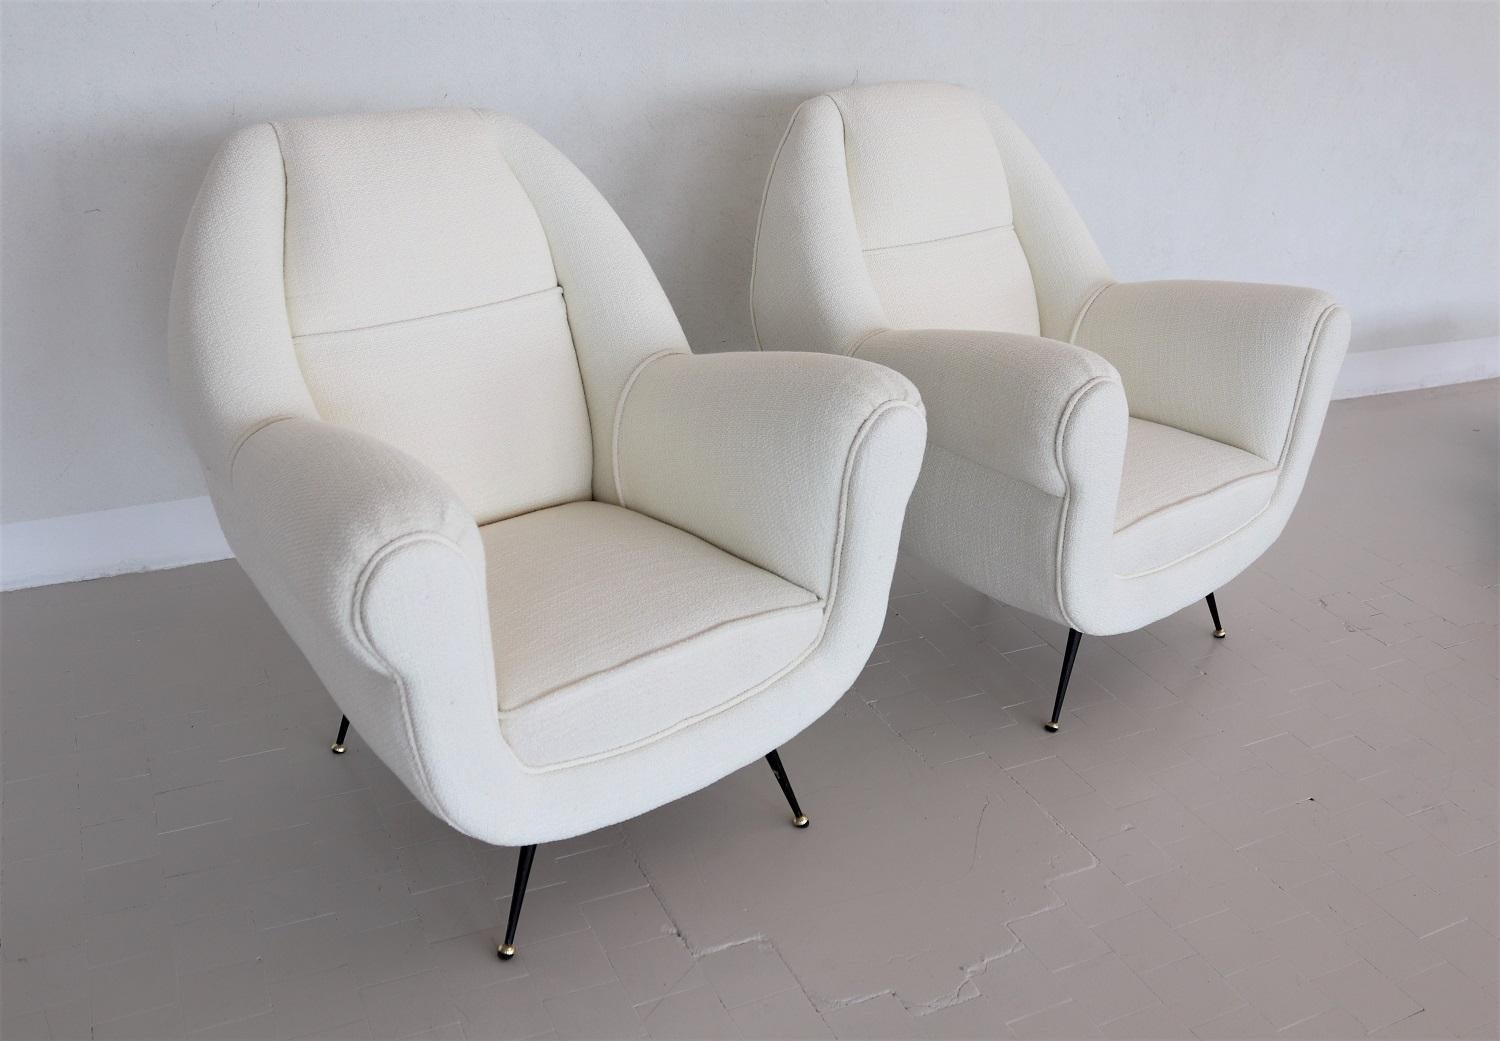 Mid-Century Modern Italian Midcentury Armchairs in White Upholstery and Brass Stiletto Feet, 1960s For Sale